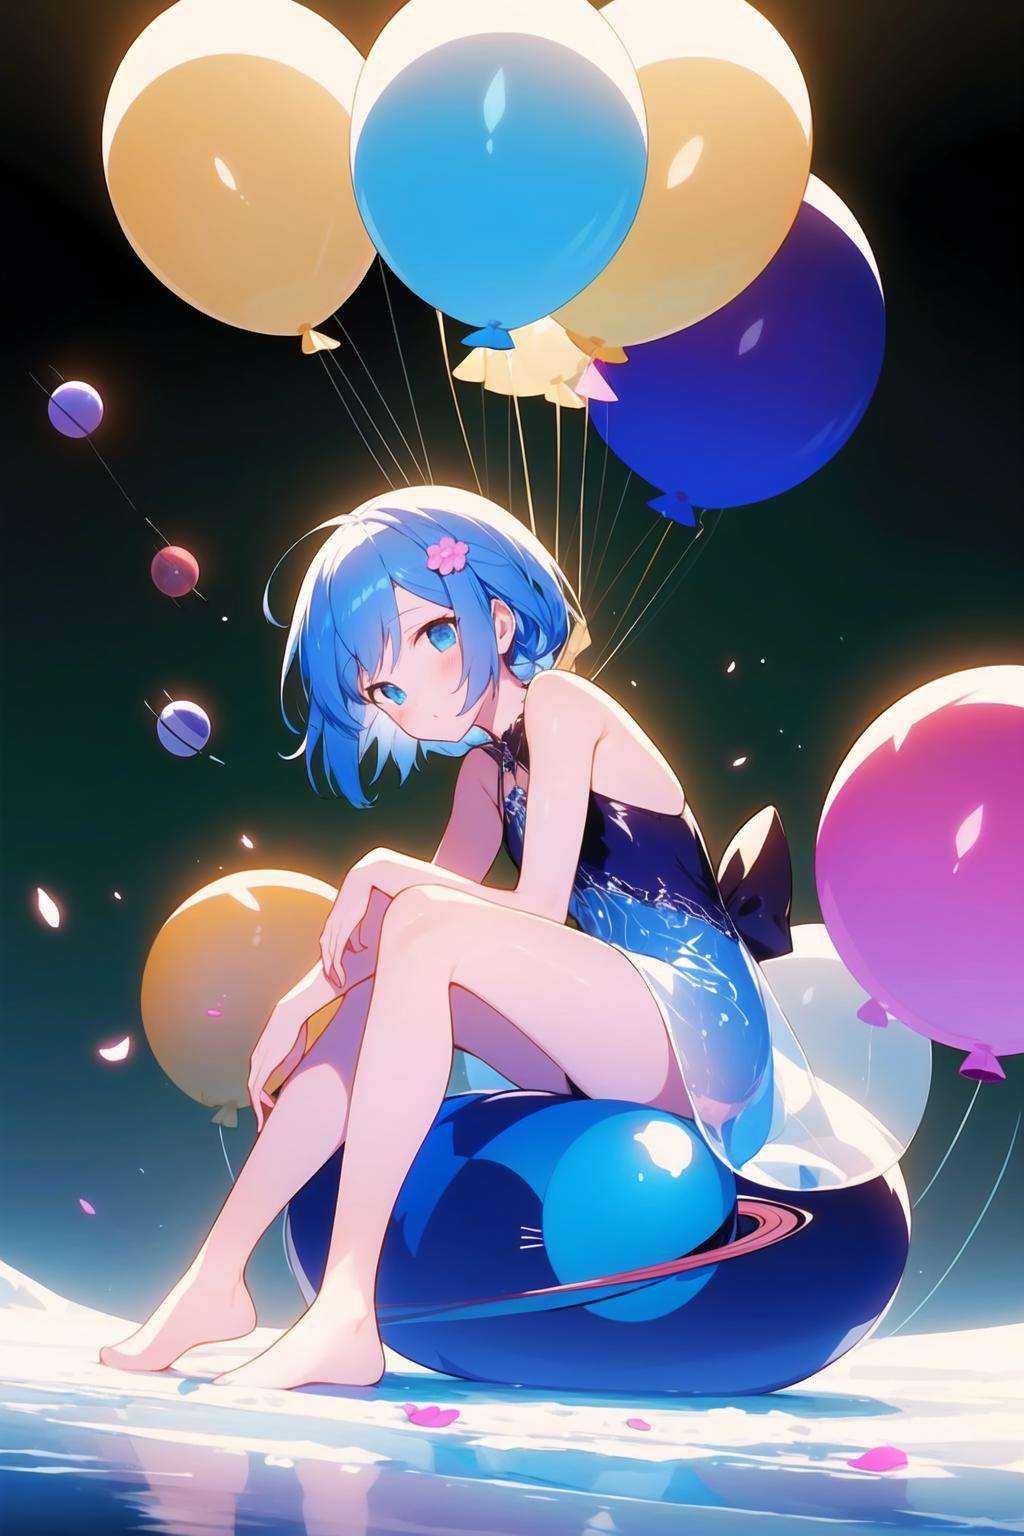 ([balloons:Small planets:0.5]:1.4), (Small_planets inside of balloons:1.4), (lots of colorful Small_planets:1.35)(colorful planets, earth, floating petals, big balloons:1.22),1 girl, cute face,Full body, sitting, detailed beautiful eyes, bare legs, costume combination, Goddess, perfect body, [nsfw:0.88](sitting on ice_planet:1.22)(lots of [floting blue Butterflies:floting ice:0.4]:1.22)(detailed light), (an extremely delicate and beautiful), volume light, best shadow,cinematic lighting, Depth of field, dynamic angle, Oily skin, <lora:103423215:1>